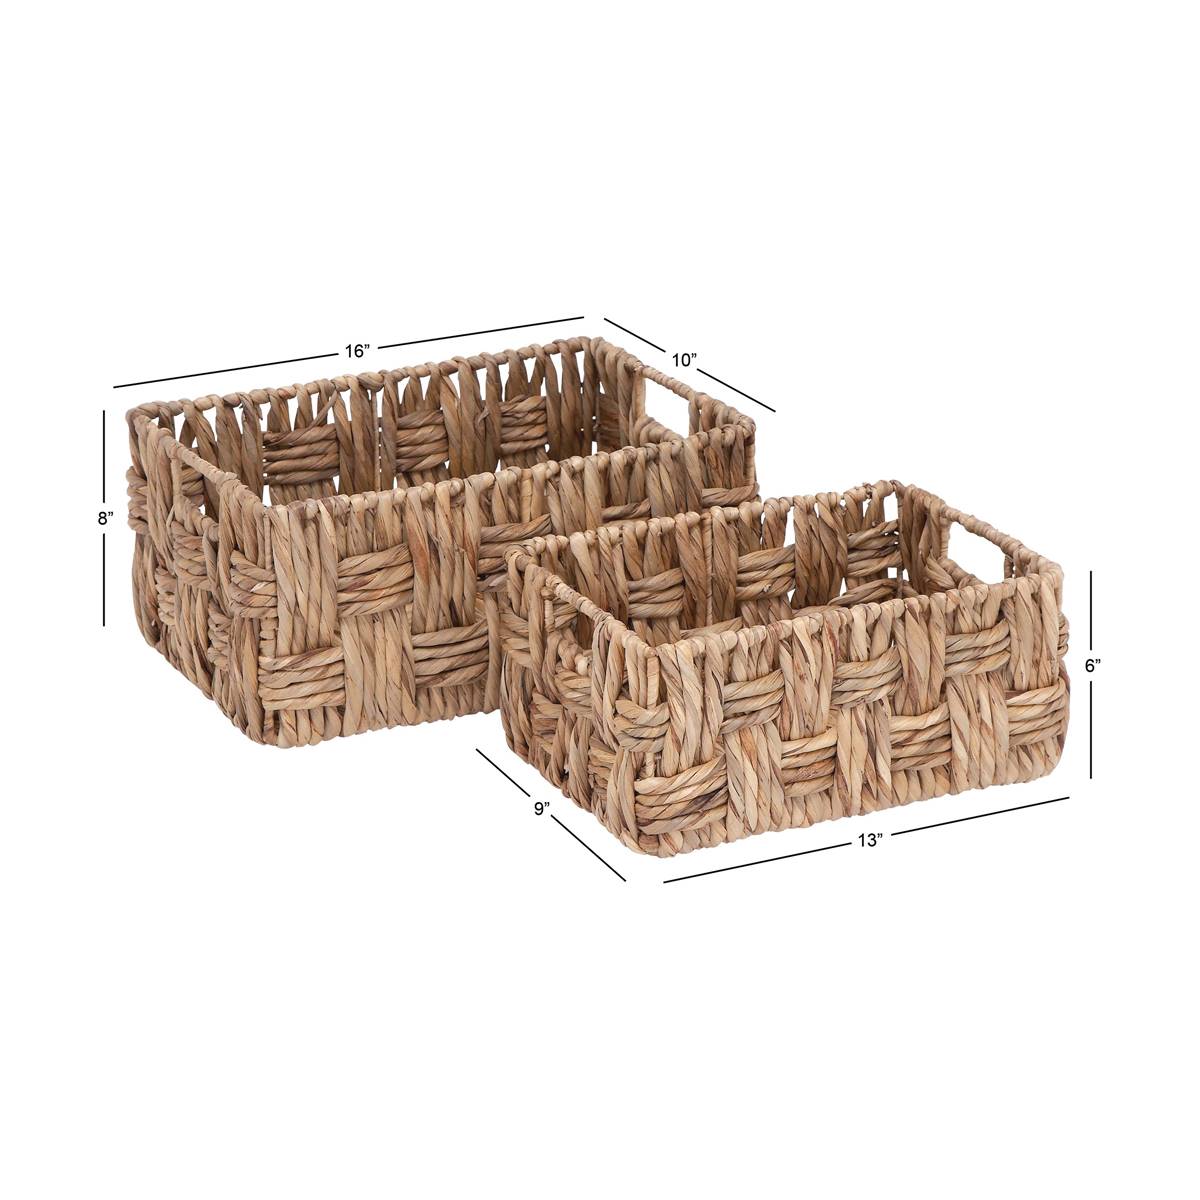 9th & Pike(R) Brown Wicker And Metal Baskets - Set Of 2